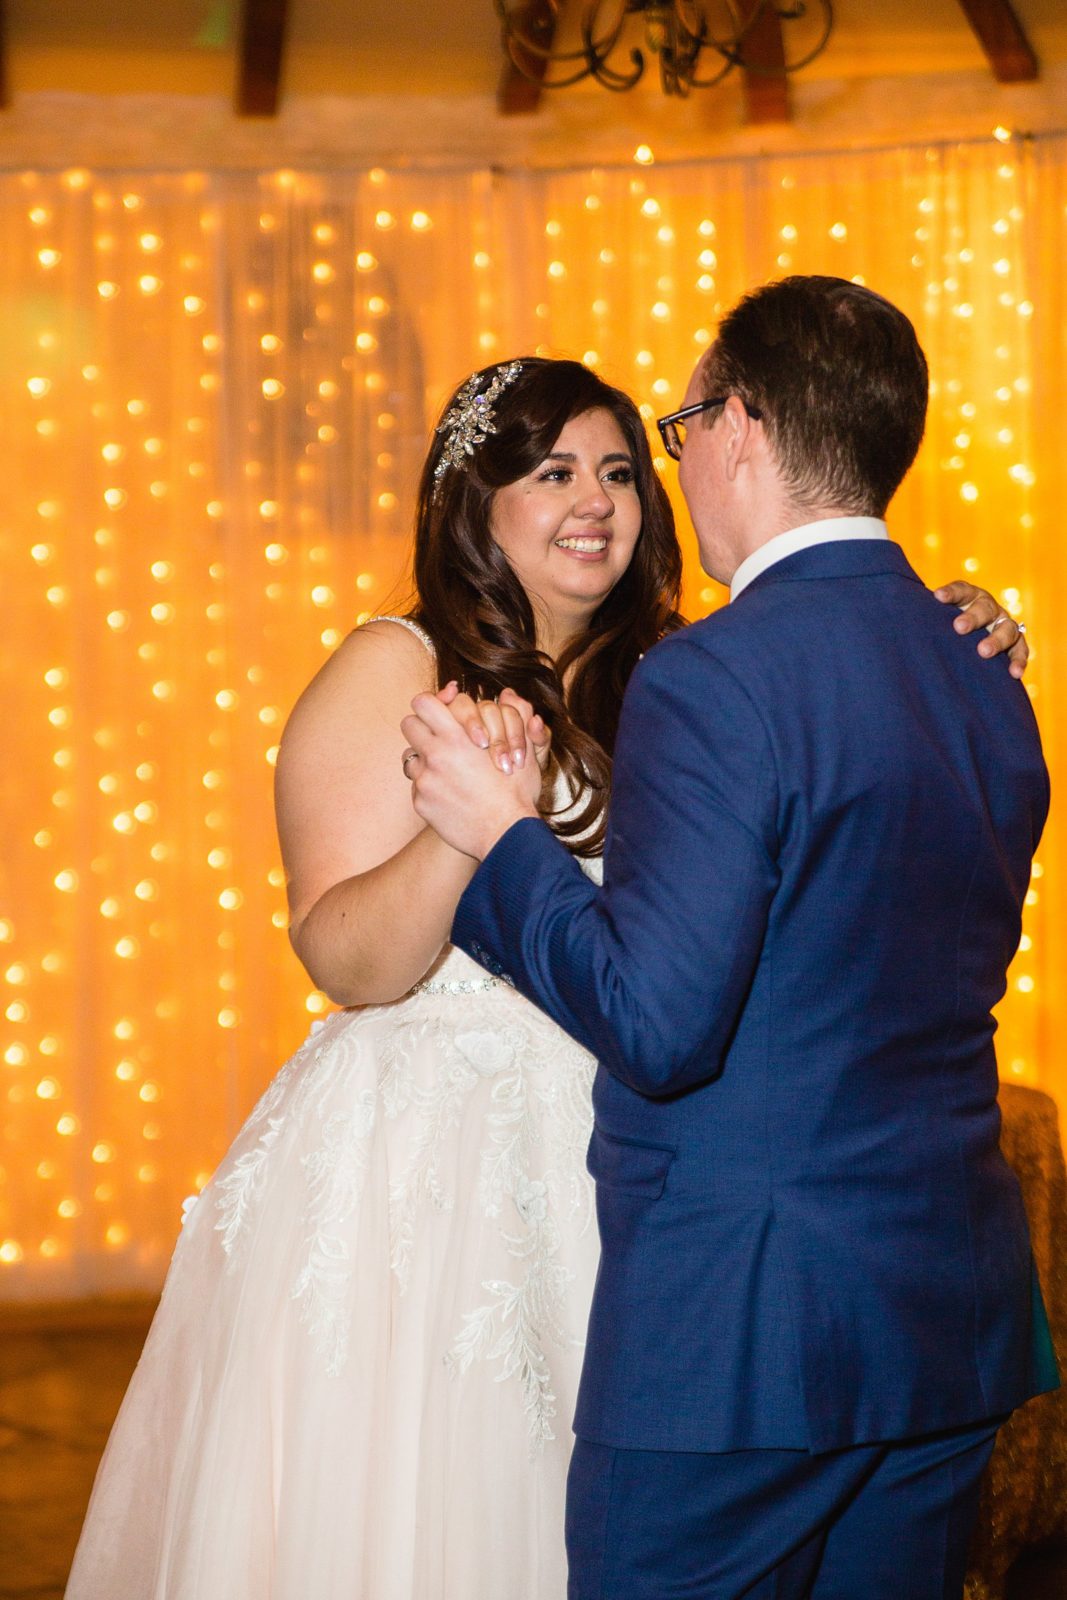 Bride and Groom sharing first dance at their Wright House Provencal wedding reception by Arizona wedding photographer PMA Photography.